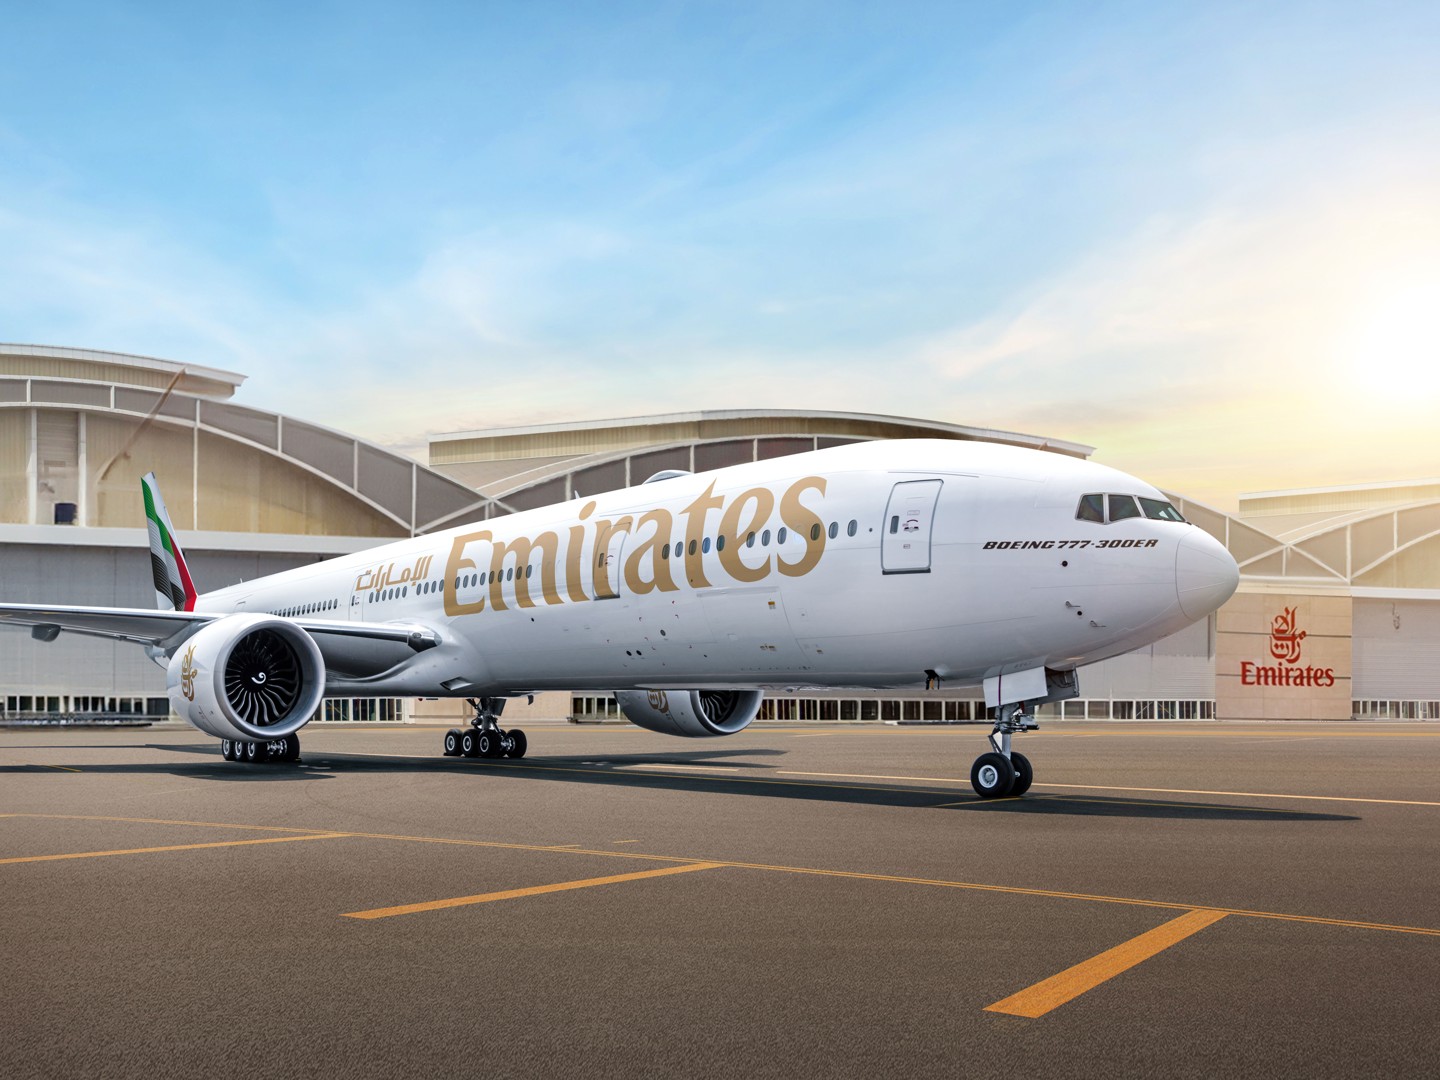 Photo: Emirates to retrofit an additional 71 A380s and B777s, extending airline’s nose-to-tail cabin refreshes to 191 aircraft